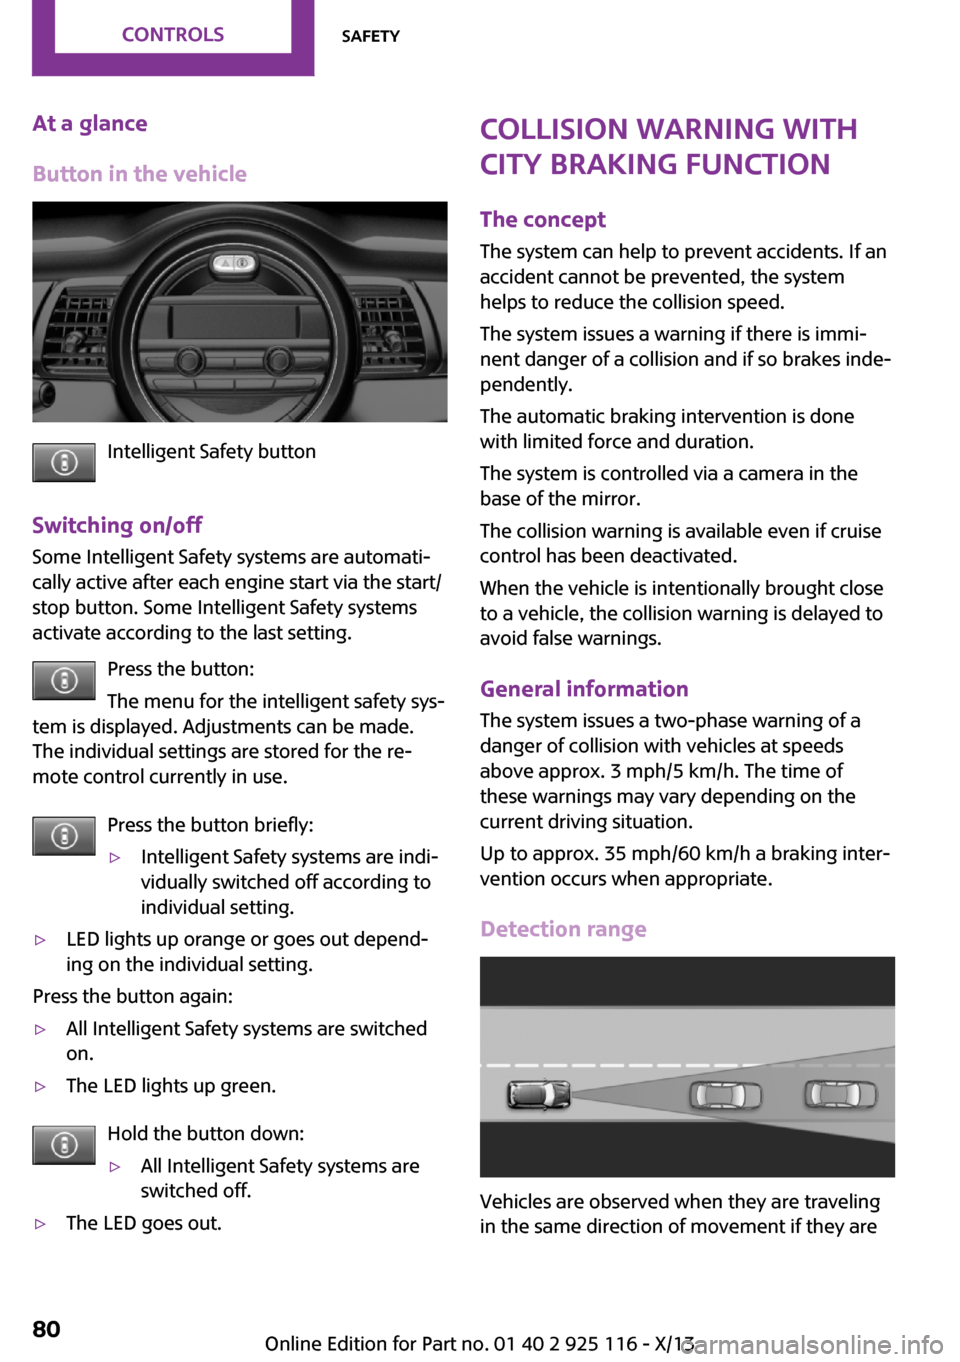 MINI 3 door 2013  Owners Manual At a glance
Button in the vehicle
Intelligent Safety button
Switching on/off Some Intelligent Safety systems are automati‐
cally active after each engine start via the start/
stop button. Some Intel